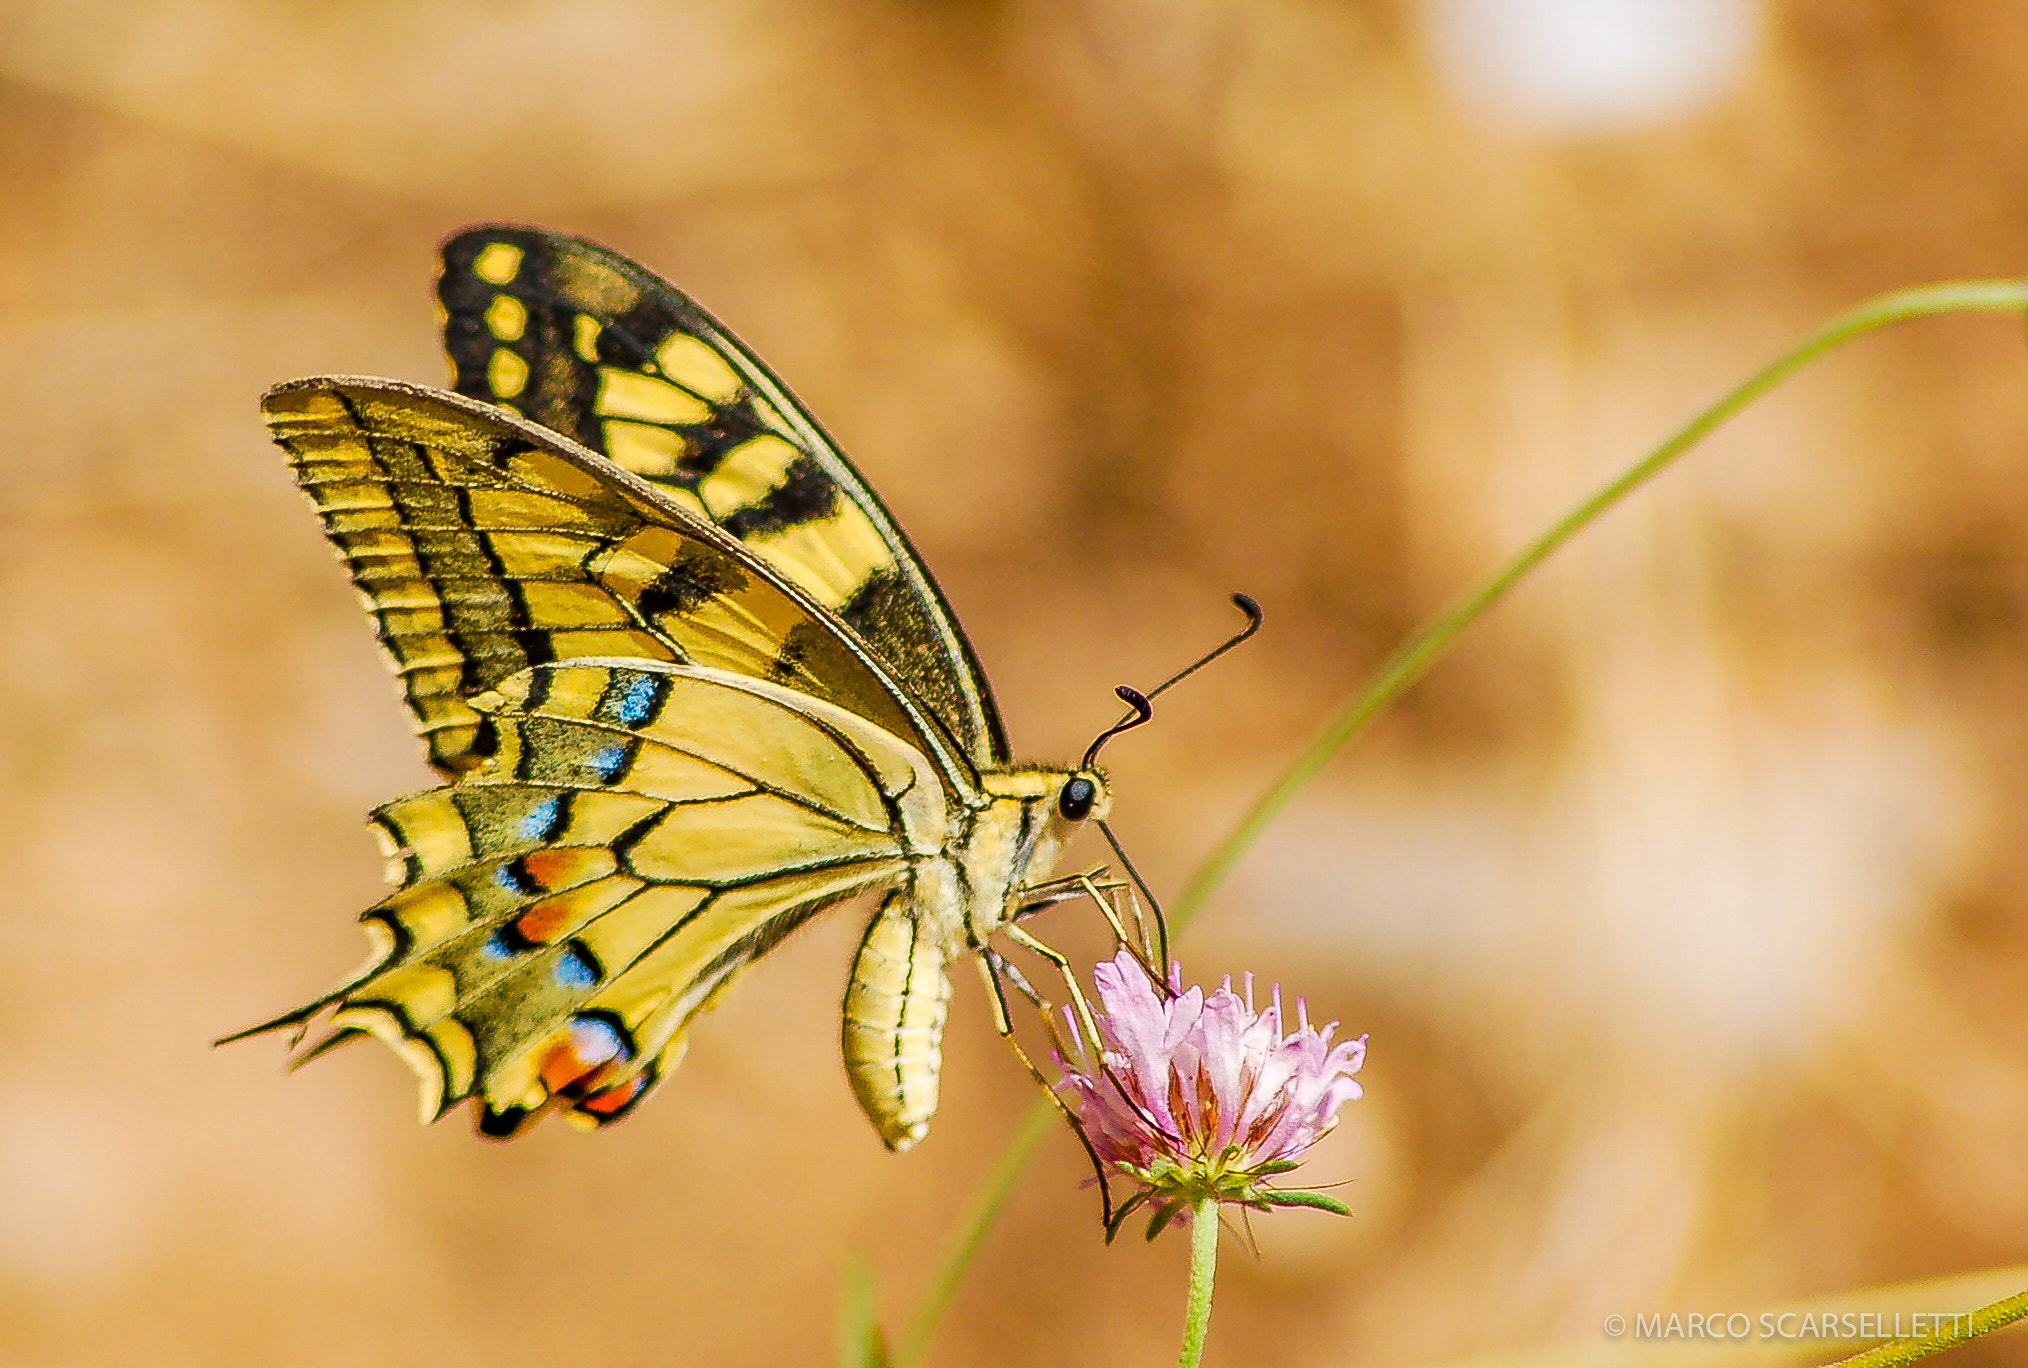 Nikon D50 sample photo. A common butterfly photography